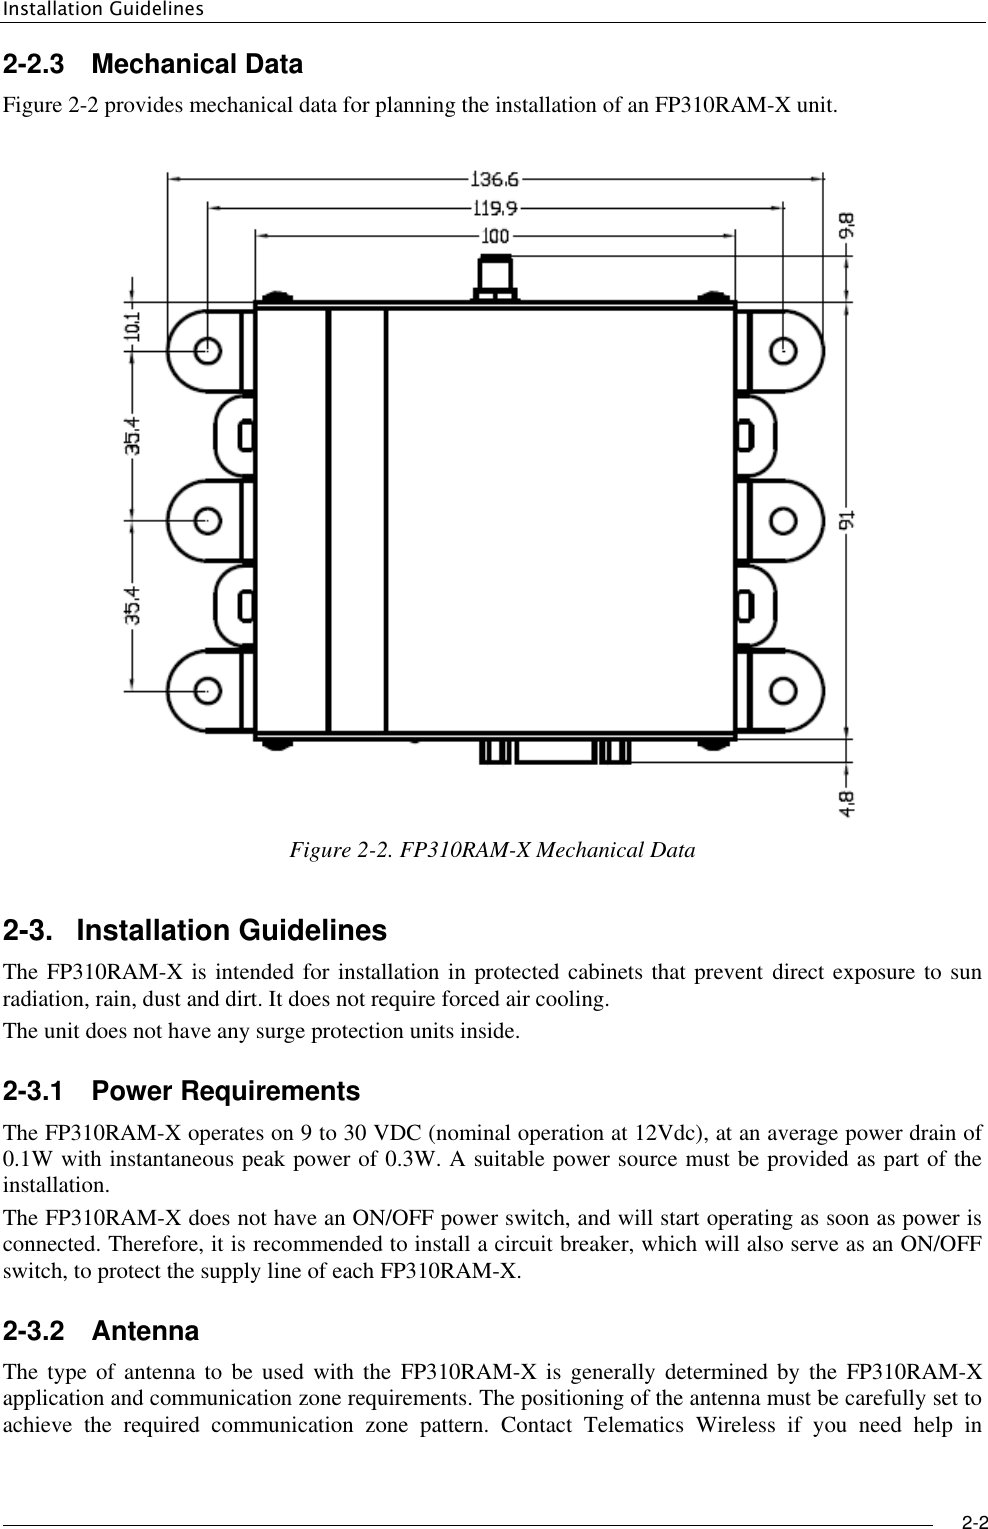 Installation Guidelines     2-2   2-2.3  Mechanical Data Figure ‎2-2 provides mechanical data for planning the installation of an FP310RAM-X unit.  Figure ‎2-2. FP310RAM-X Mechanical Data 2-3.  Installation Guidelines The FP310RAM-X is intended for installation in protected cabinets that prevent direct exposure to sun radiation, rain, dust and dirt. It does not require forced air cooling. The unit does not have any surge protection units inside. 2-3.1  Power Requirements The FP310RAM-X operates on 9 to 30 VDC (nominal operation at 12Vdc), at an average power drain of 0.1W with instantaneous peak power of 0.3W. A suitable power source must be provided as part of the installation.  The FP310RAM-X does not have an ON/OFF power switch, and will start operating as soon as power is connected. Therefore, it is recommended to install a circuit breaker, which will also serve as an ON/OFF switch, to protect the supply line of each FP310RAM-X. 2-3.2  Antenna The type of  antenna  to  be used  with  the  FP310RAM-X  is generally  determined by the  FP310RAM-X application and communication zone requirements. The positioning of the antenna must be carefully set to achieve  the  required  communication  zone  pattern.  Contact  Telematics  Wireless  if  you  need  help  in 